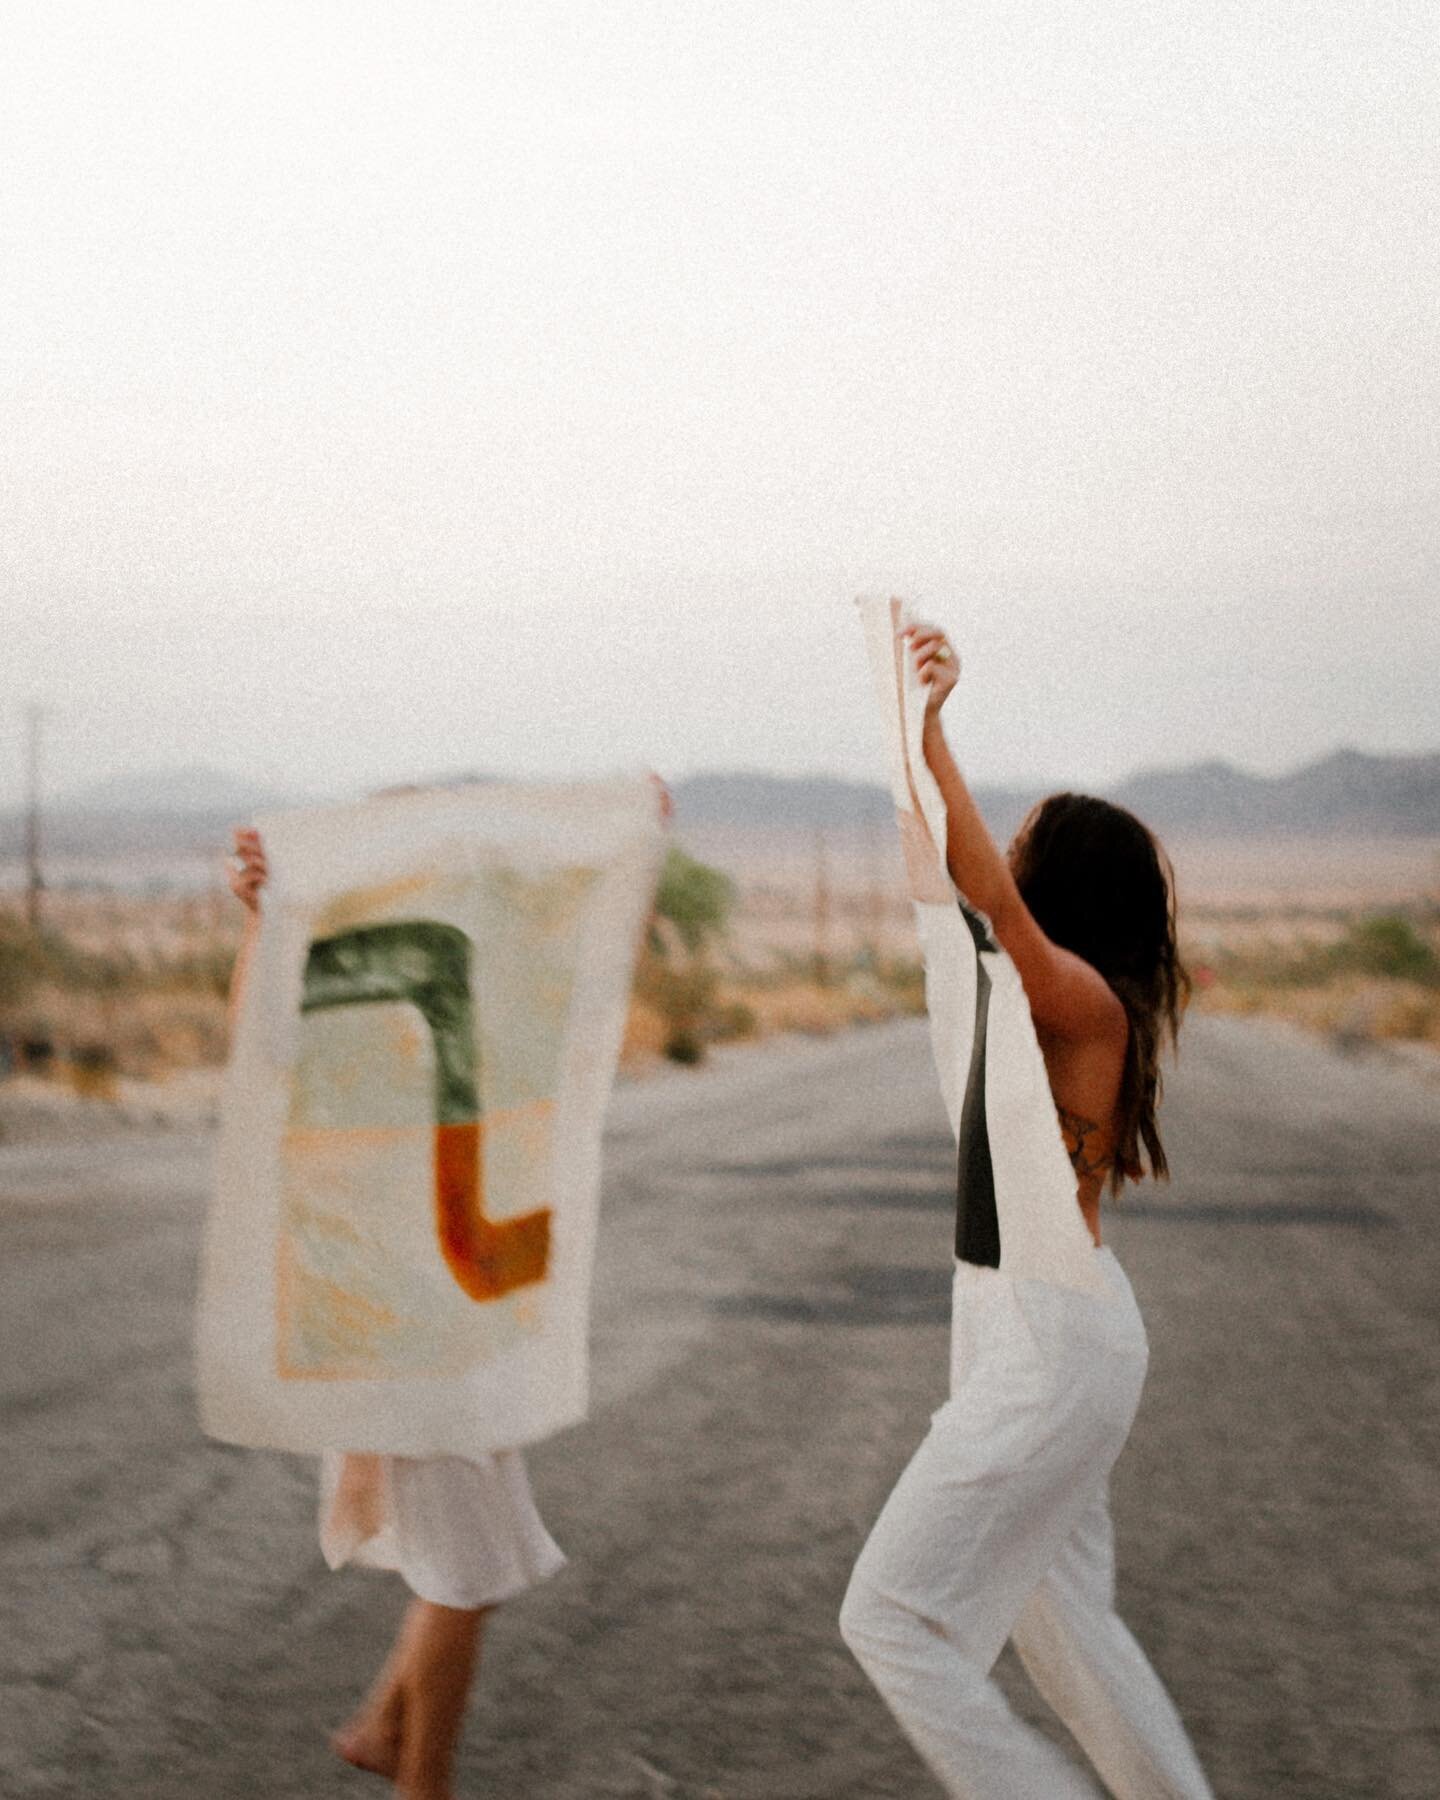 Play is an essential part of creativity. It&rsquo;s science. 

Took some new paintings out to play with us in the desert. 

📷 @meganmccluer 
🎥 @zaa.hara 
👯&zwj;♀️ @nicolehitchins